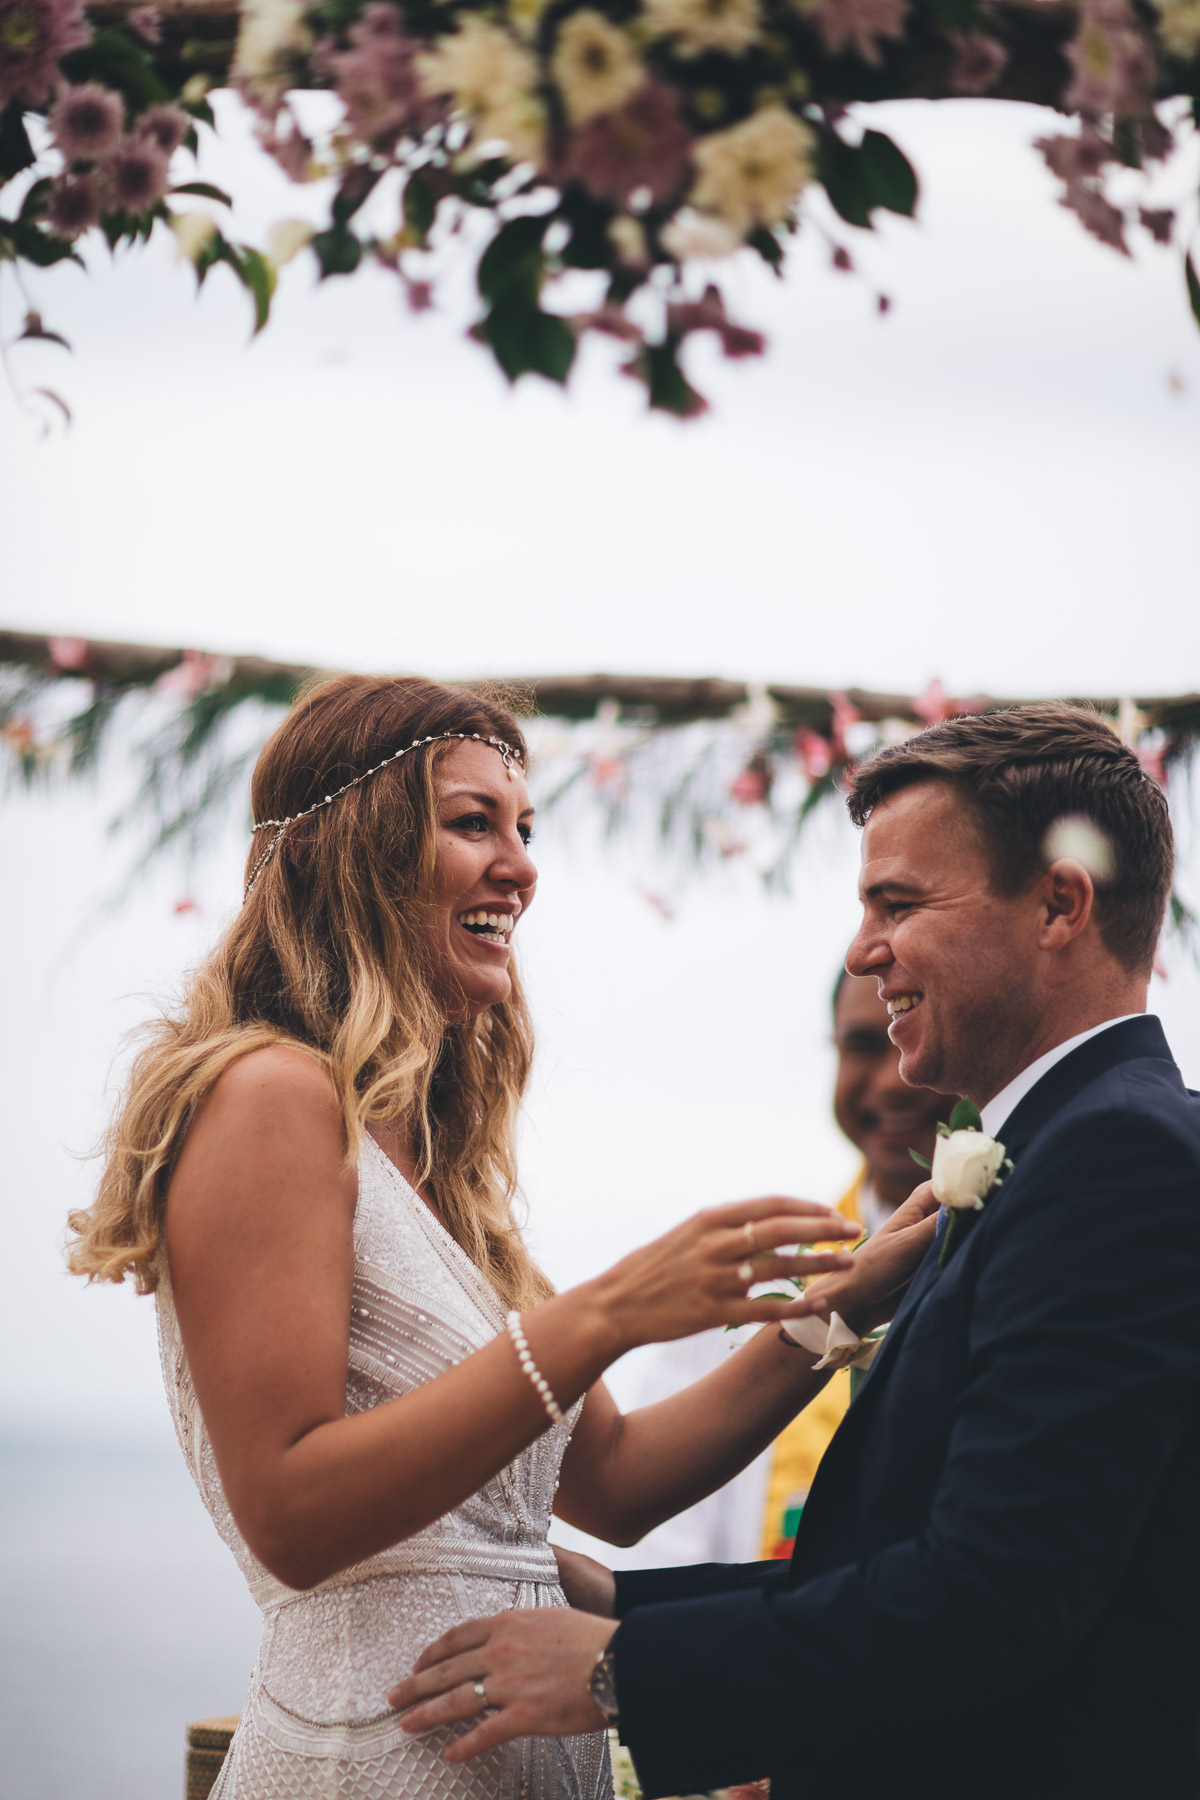 big smiles on the couple faces after they are married